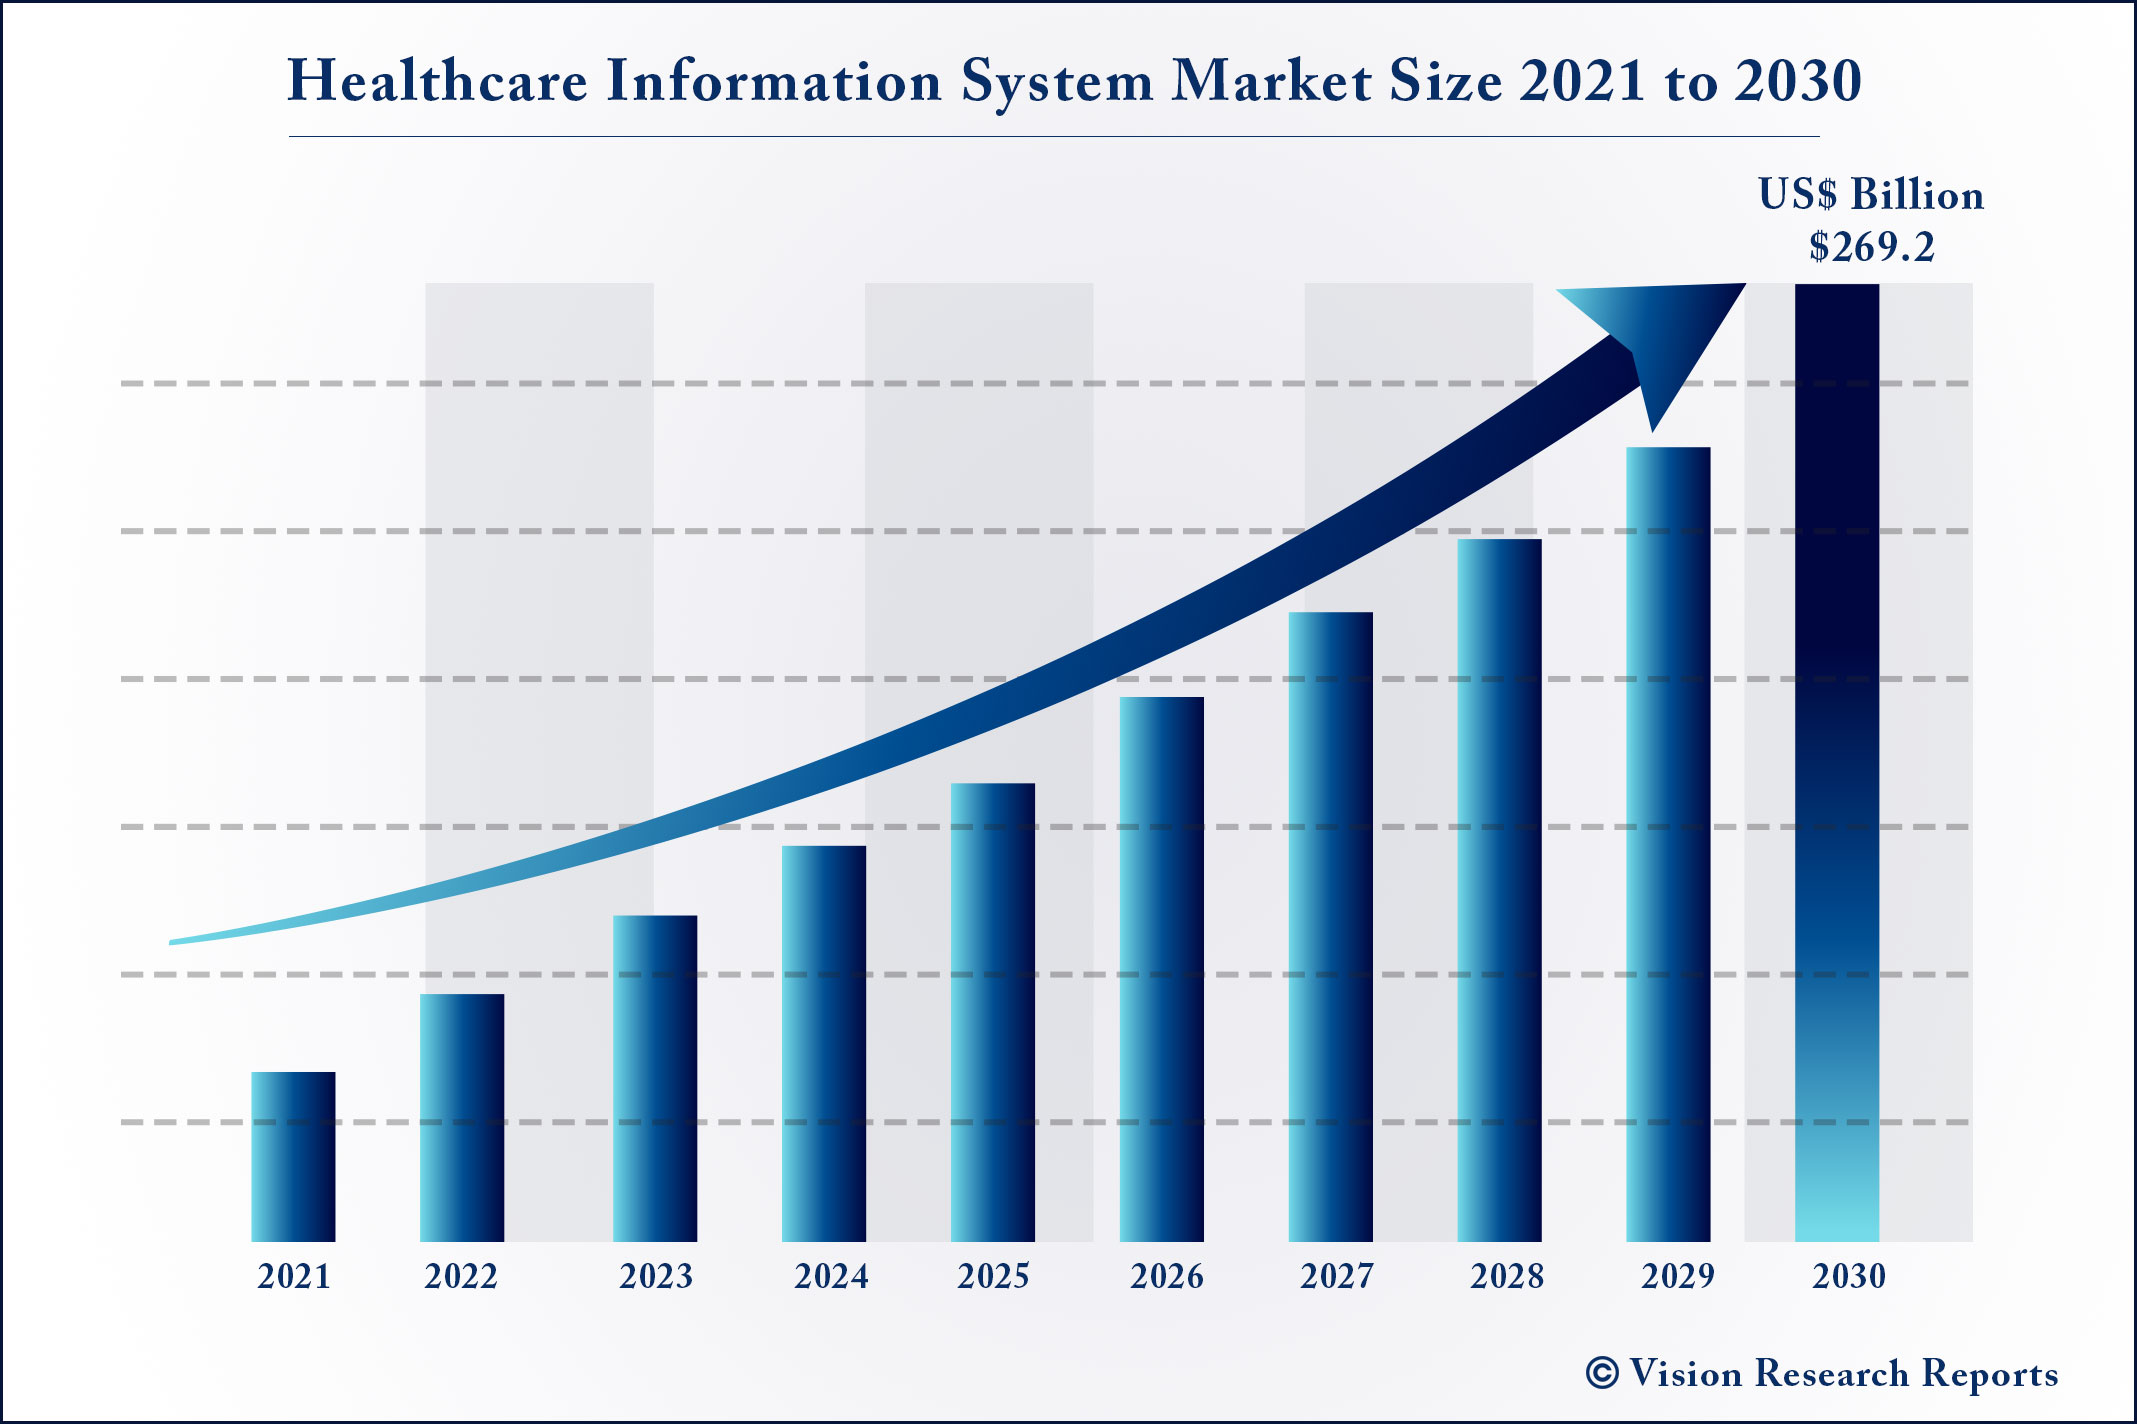 Healthcare Information System Market Size 2021 to 2030